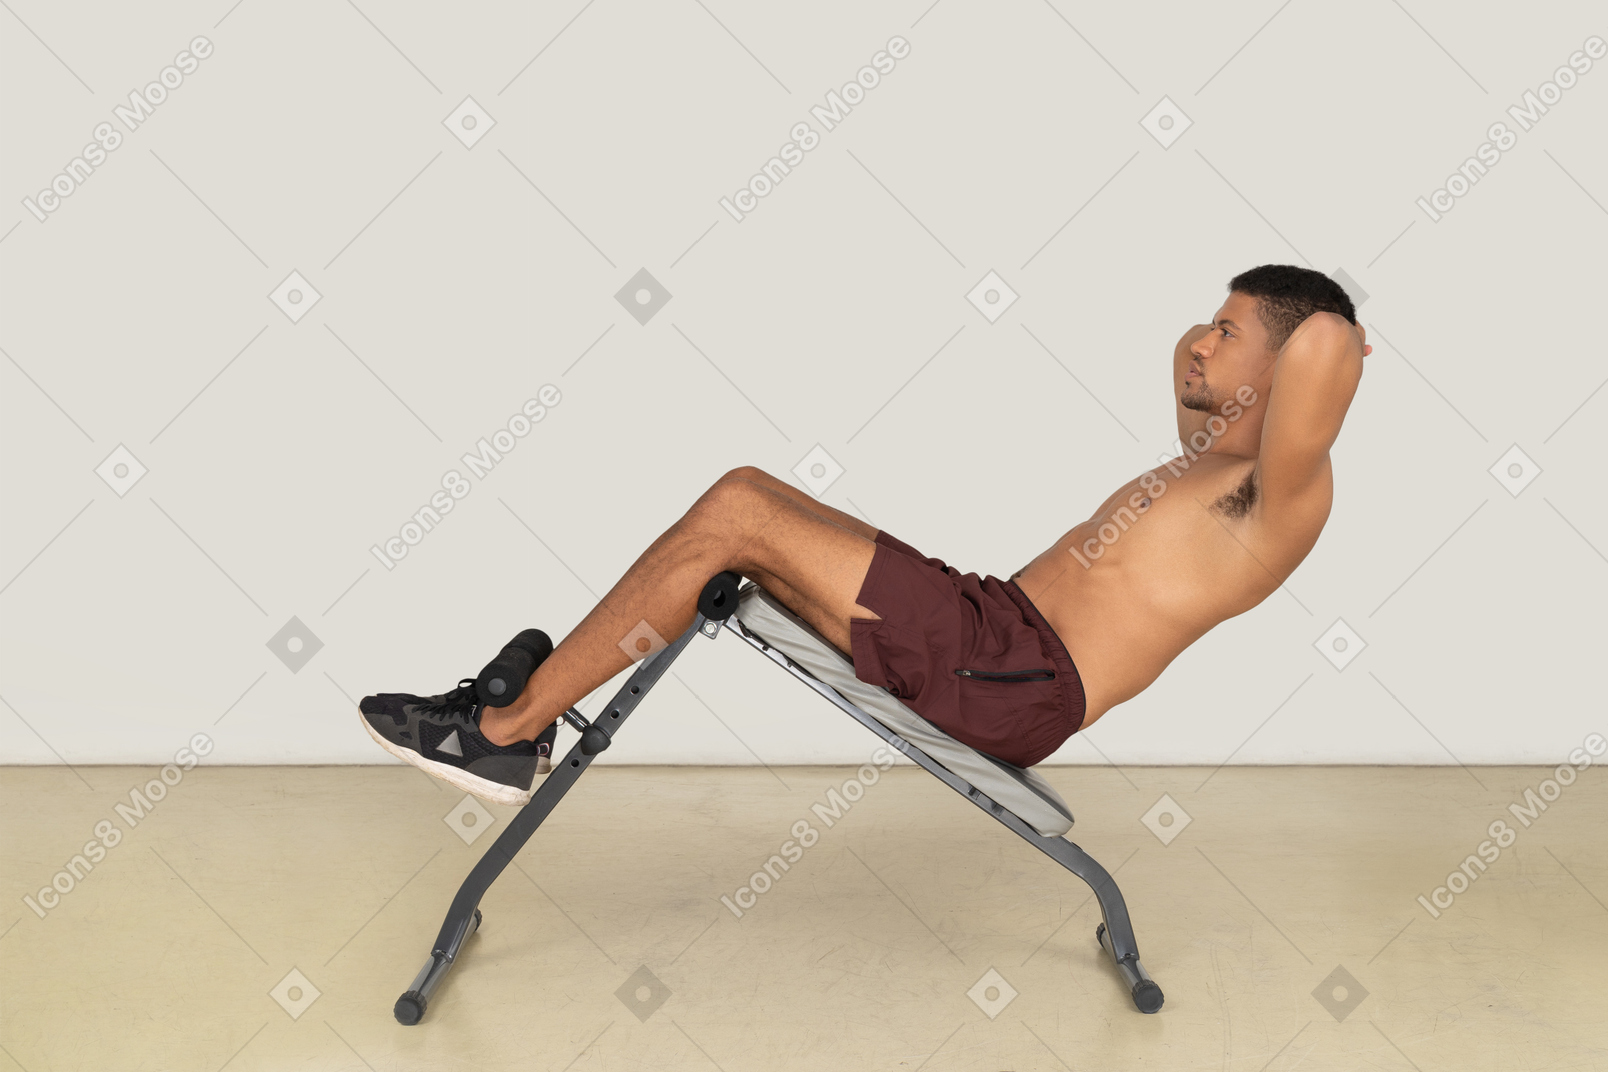 Side view of man working out on weight bench